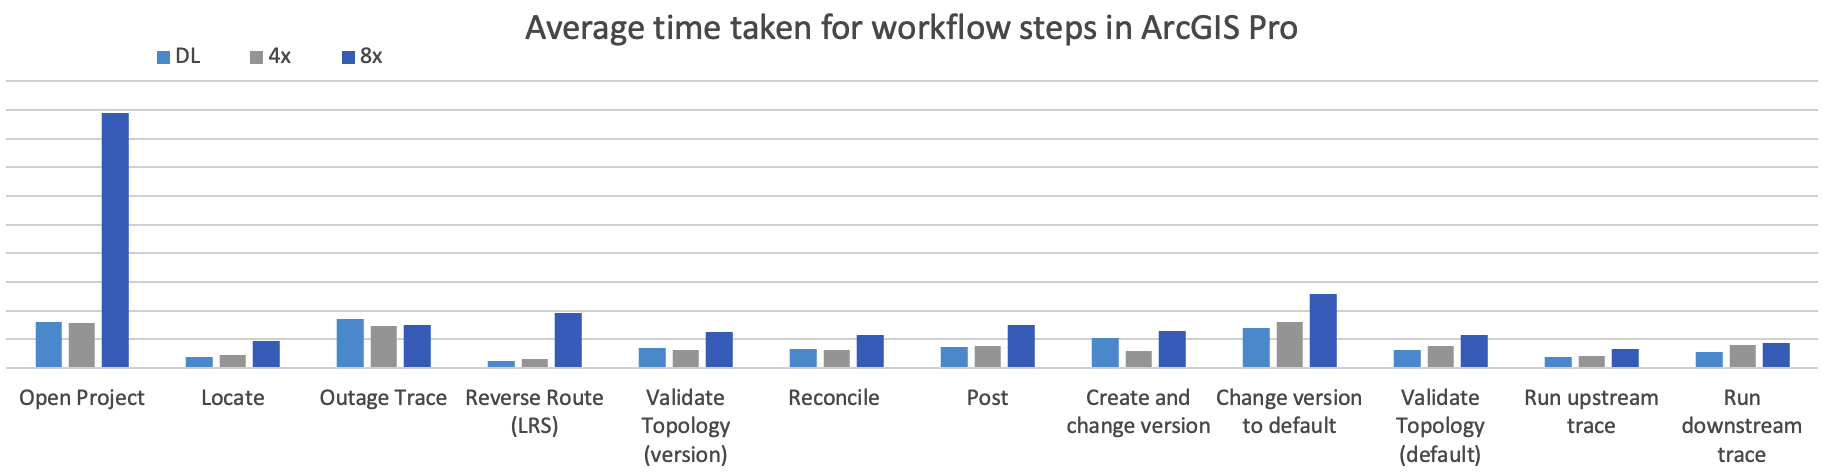 Conducted workflow step times in ArcGIS Pro across each tested design load scenario